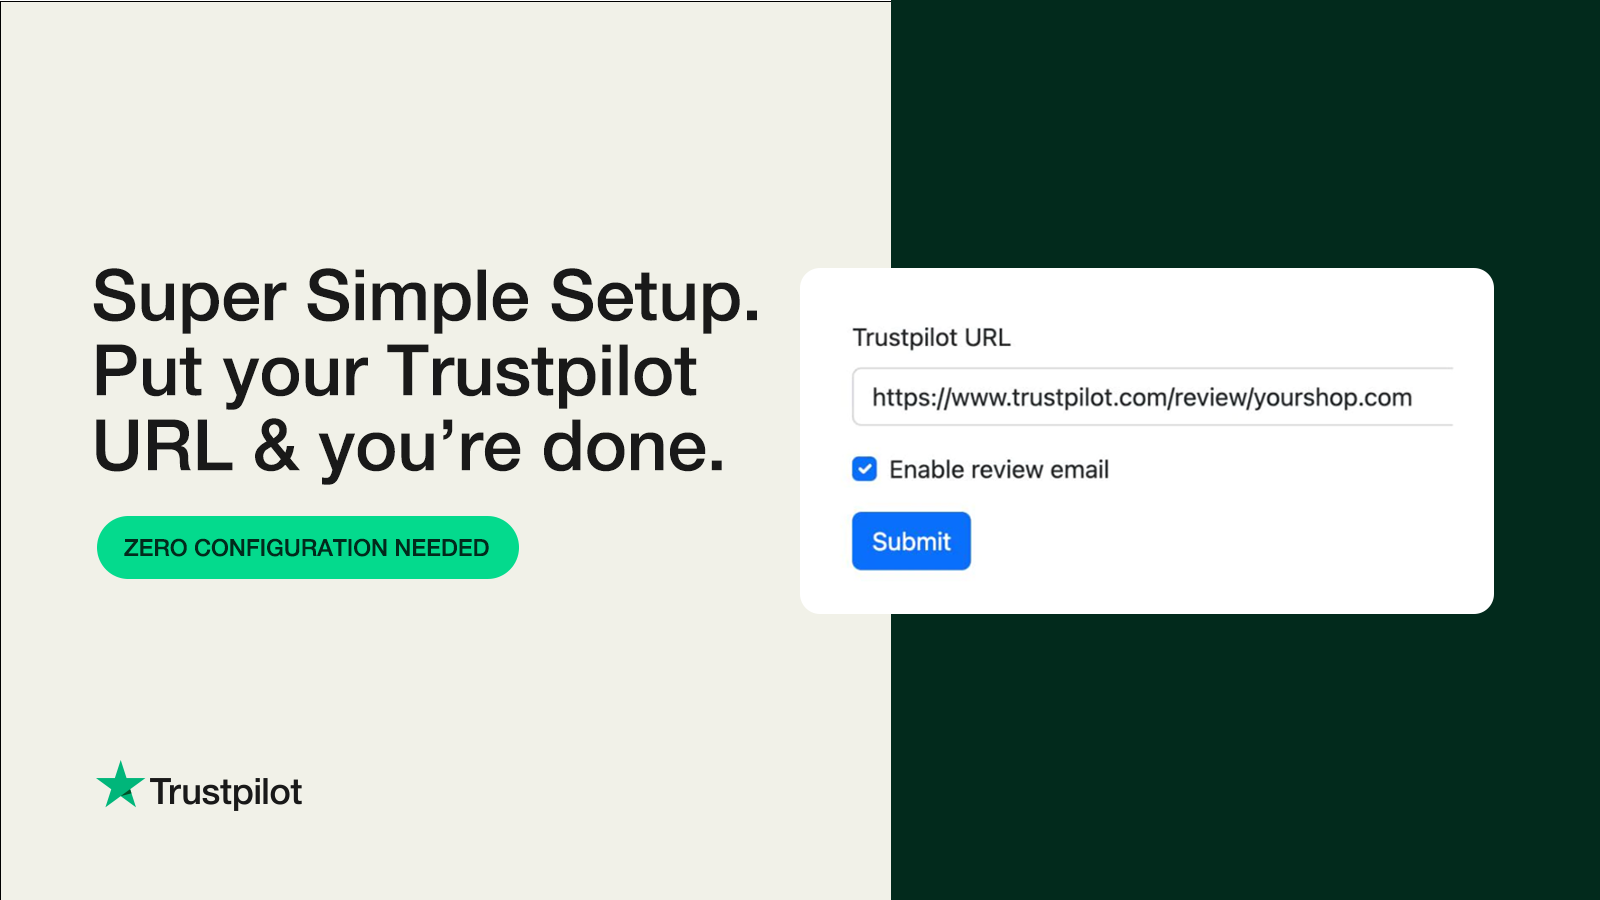 Super Simple Setup. Put your Trustpilot URL and you're done!